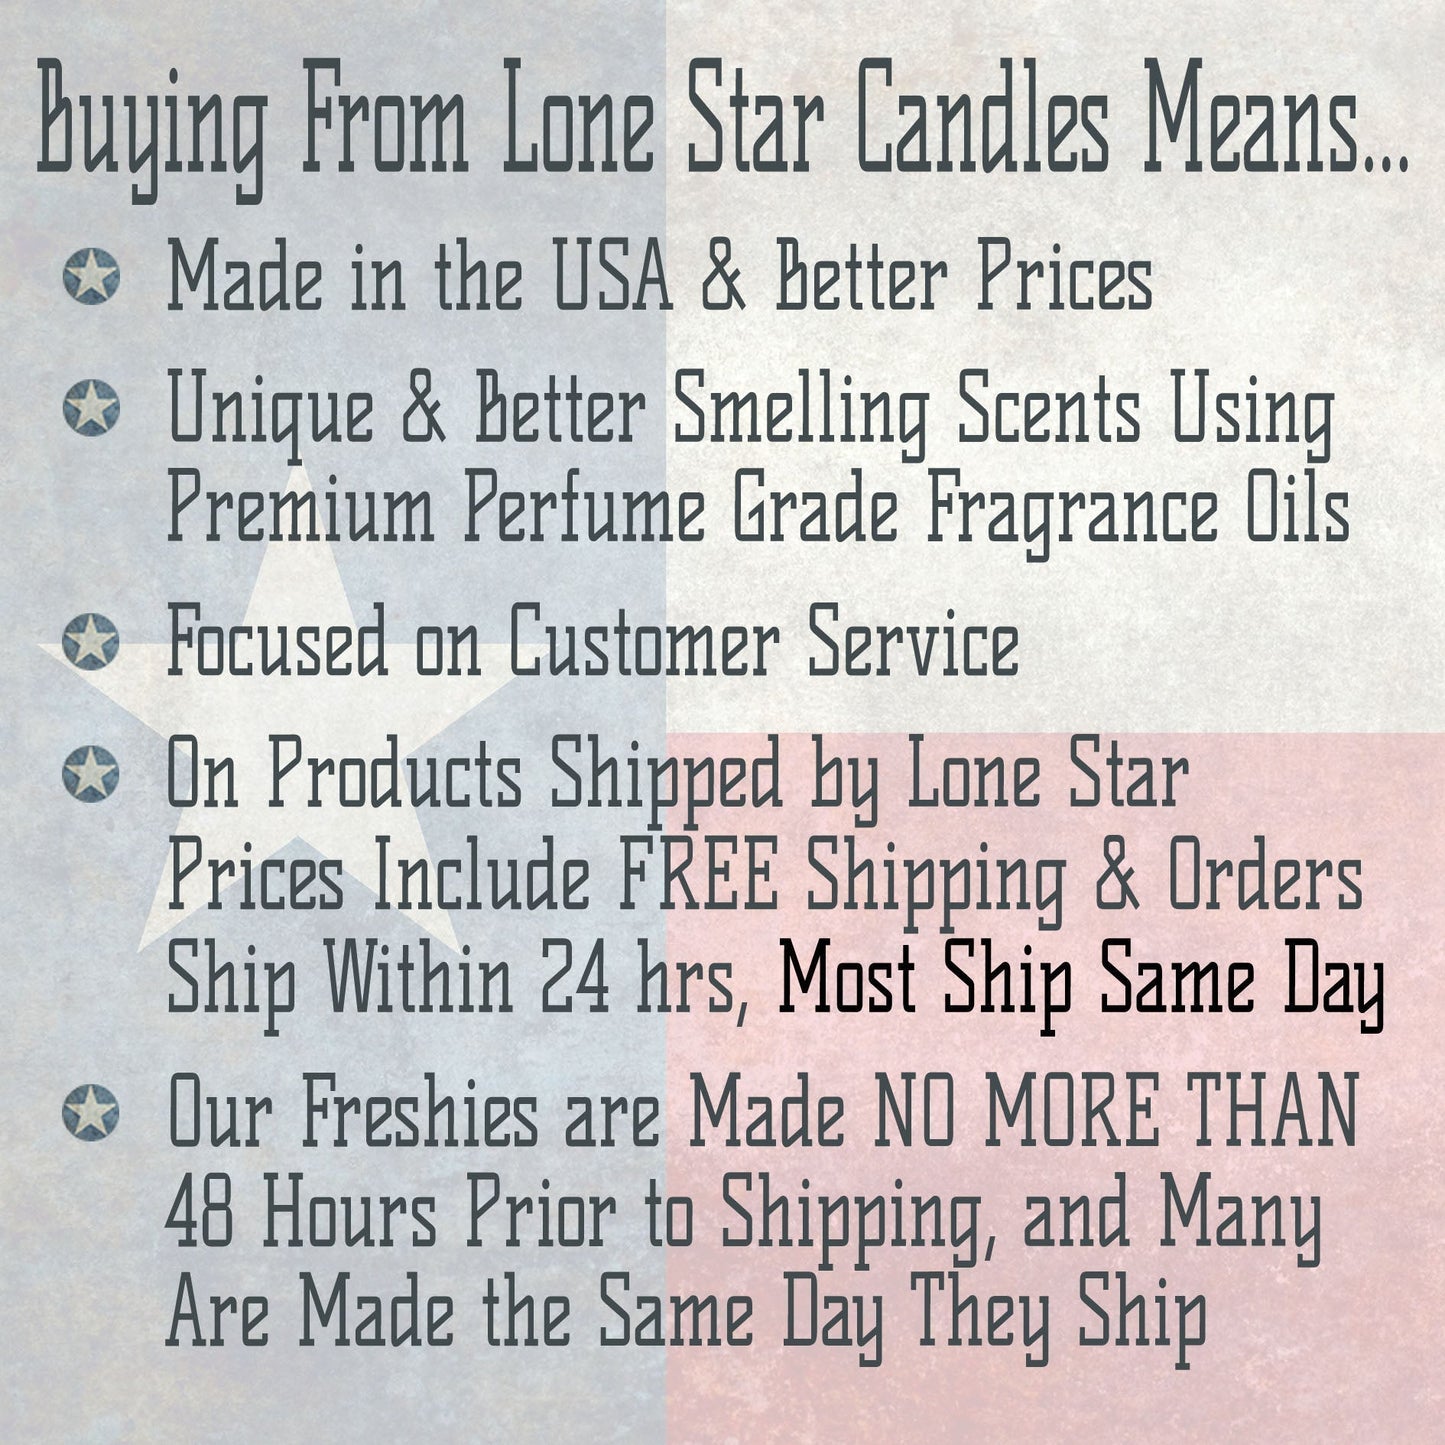 Strawberry Leather, Lone Star Candles & More’s Premium Strongly Scented Freshies, Genuine Leather with Sweet & Juicy Strawberries, Car & Air Freshener, USA Made in Texas, Strawberry Texas State 1-Pack